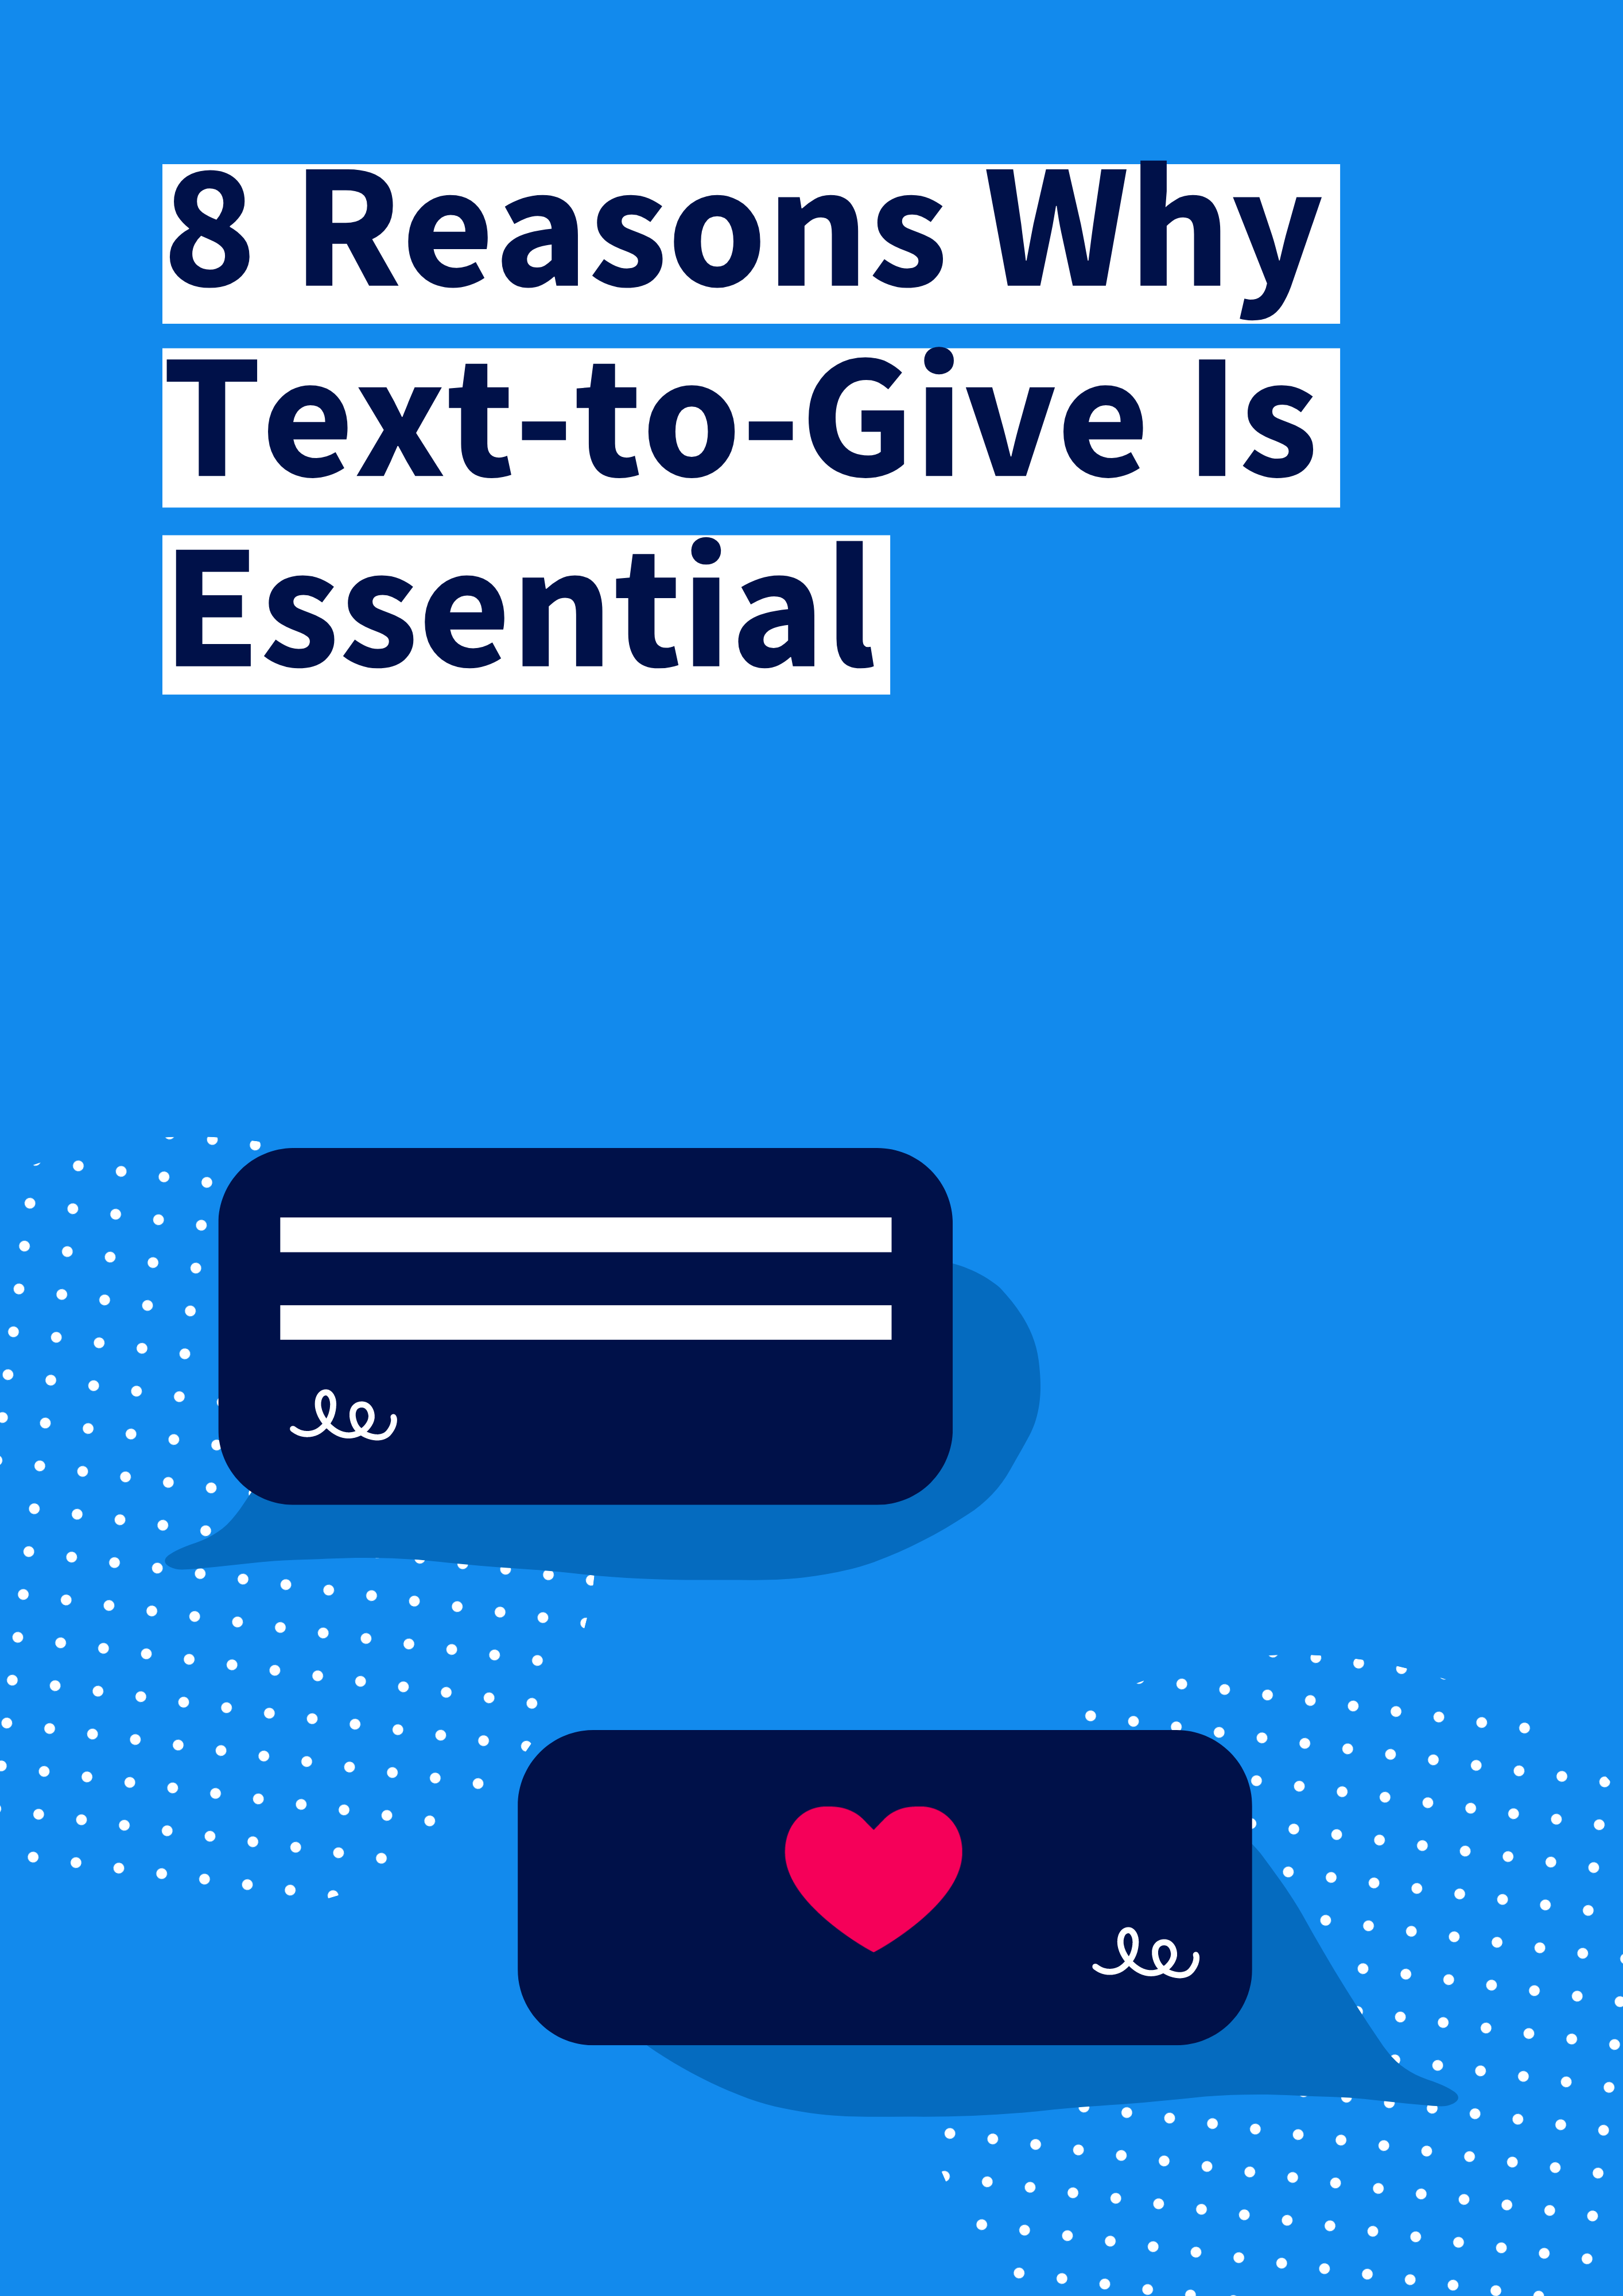 Why Text-to-Give Is Essential